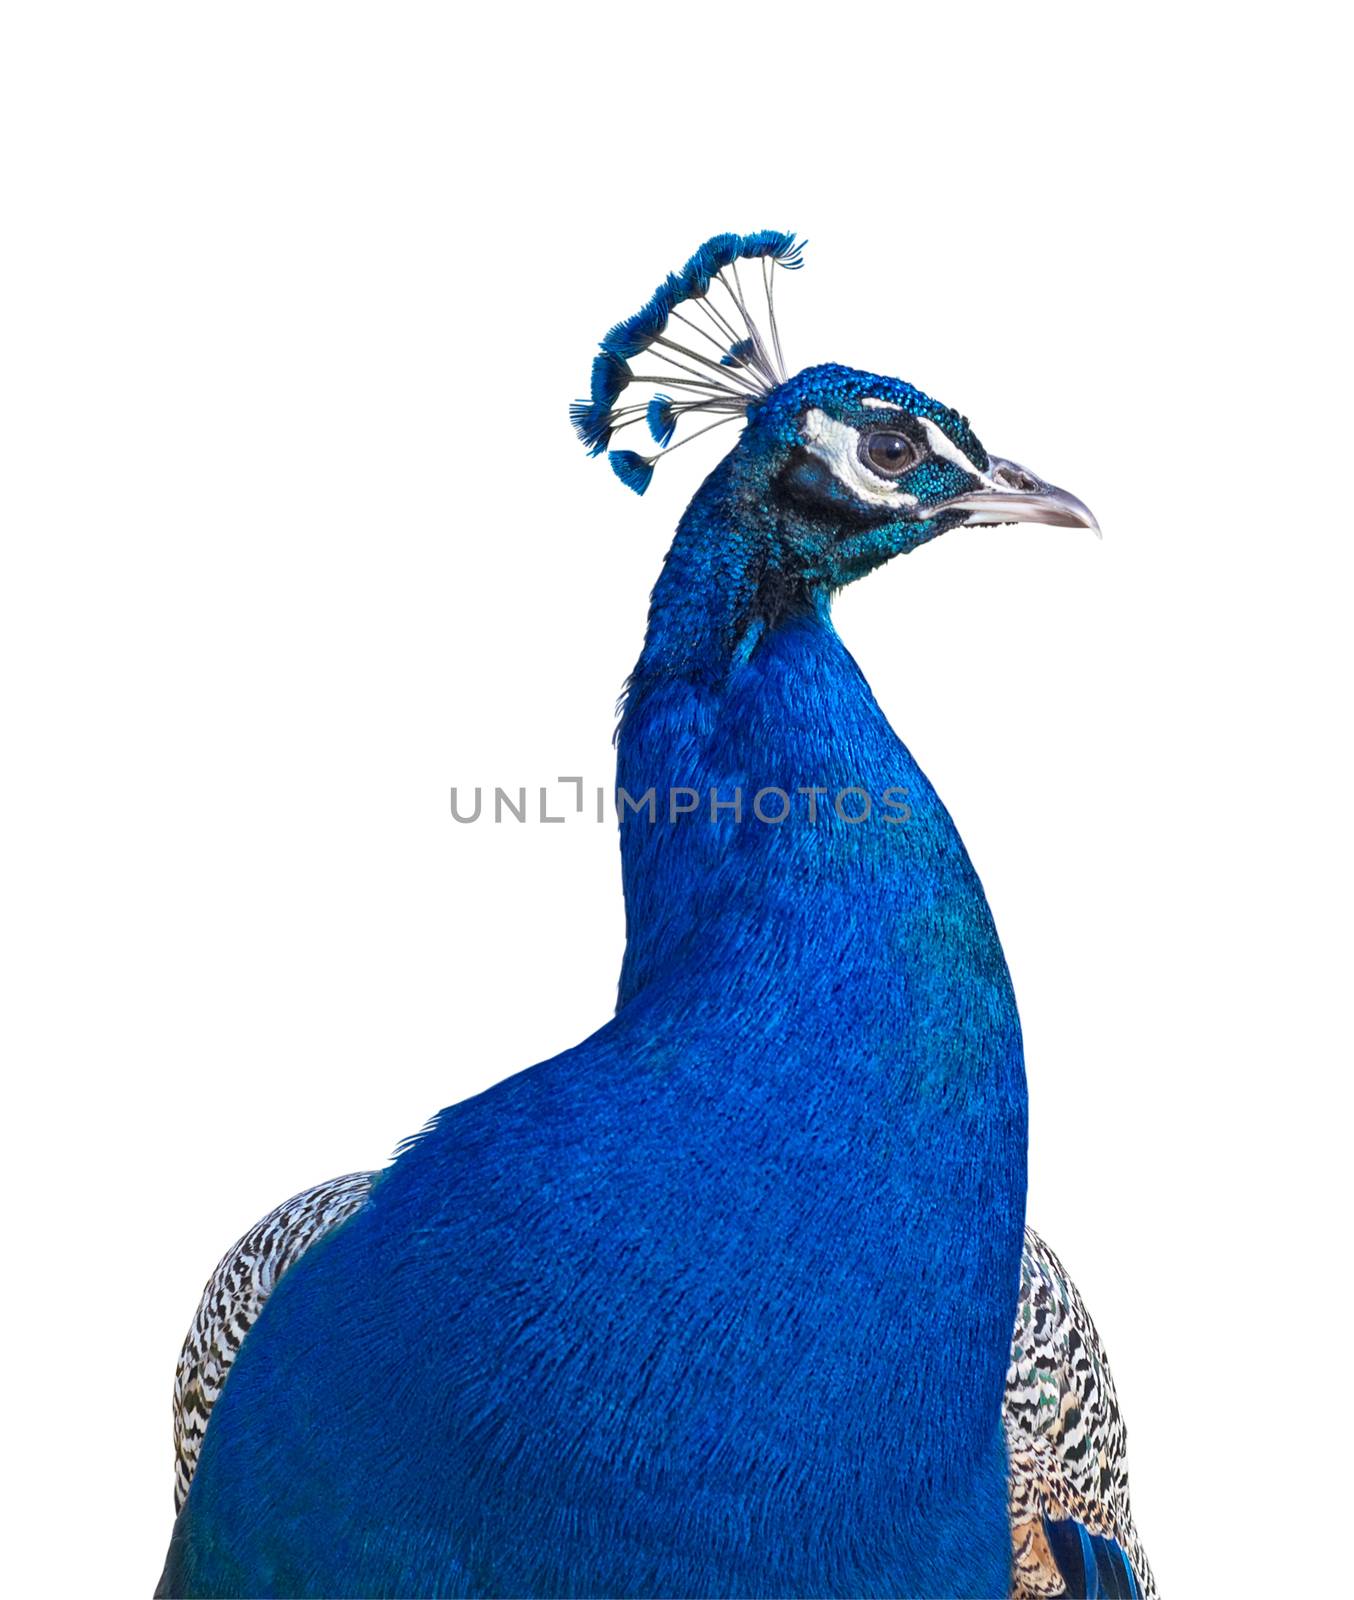 Peacock closeup isolated on white background with clipping path